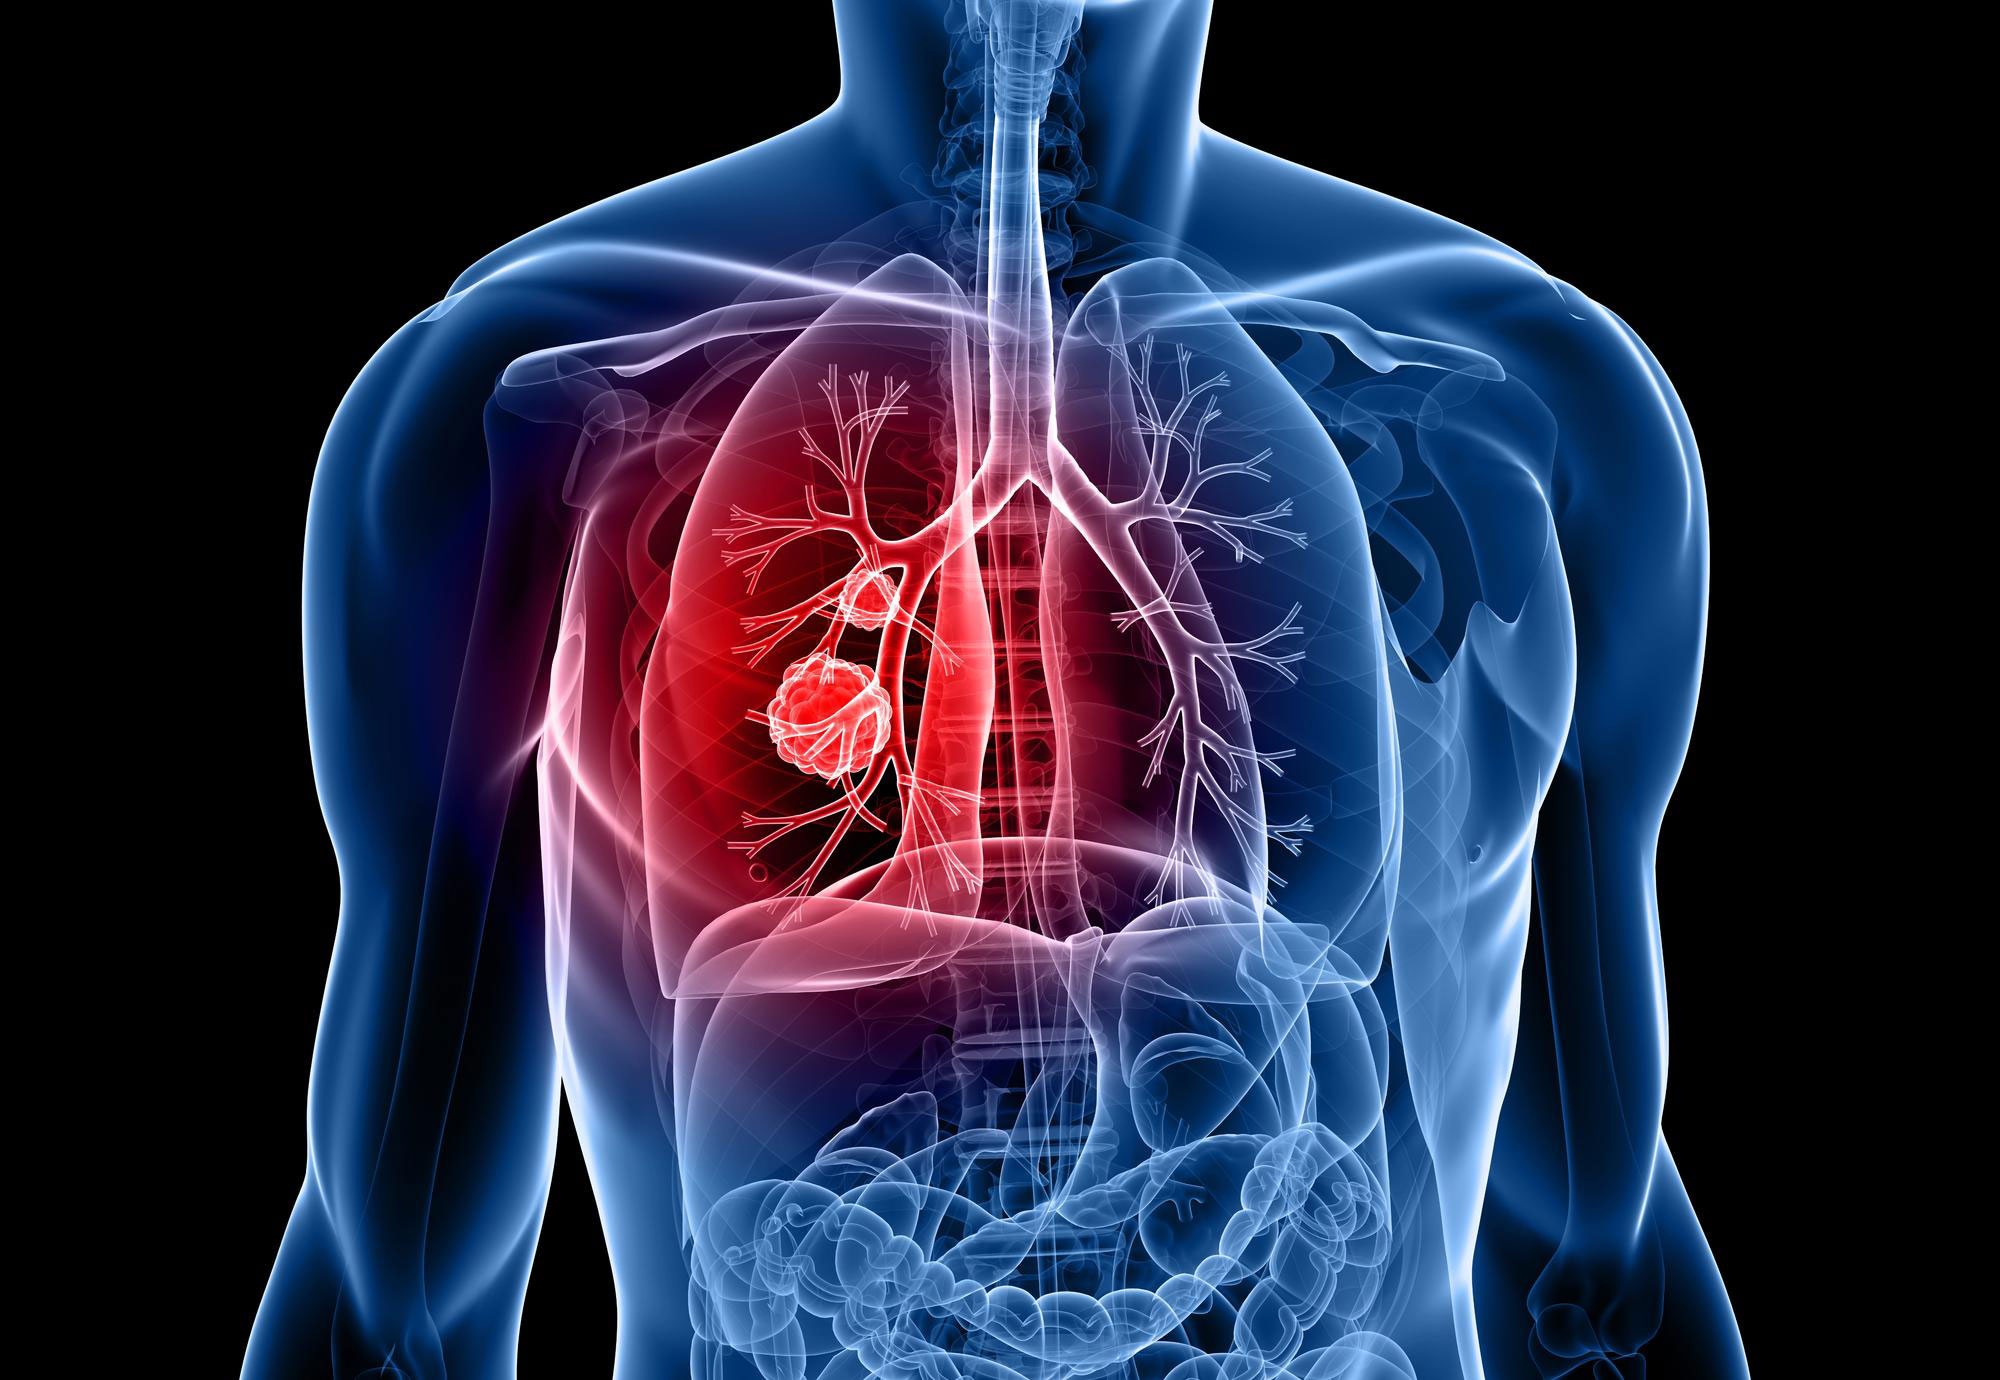 Effect of COVID-19 on Lungs